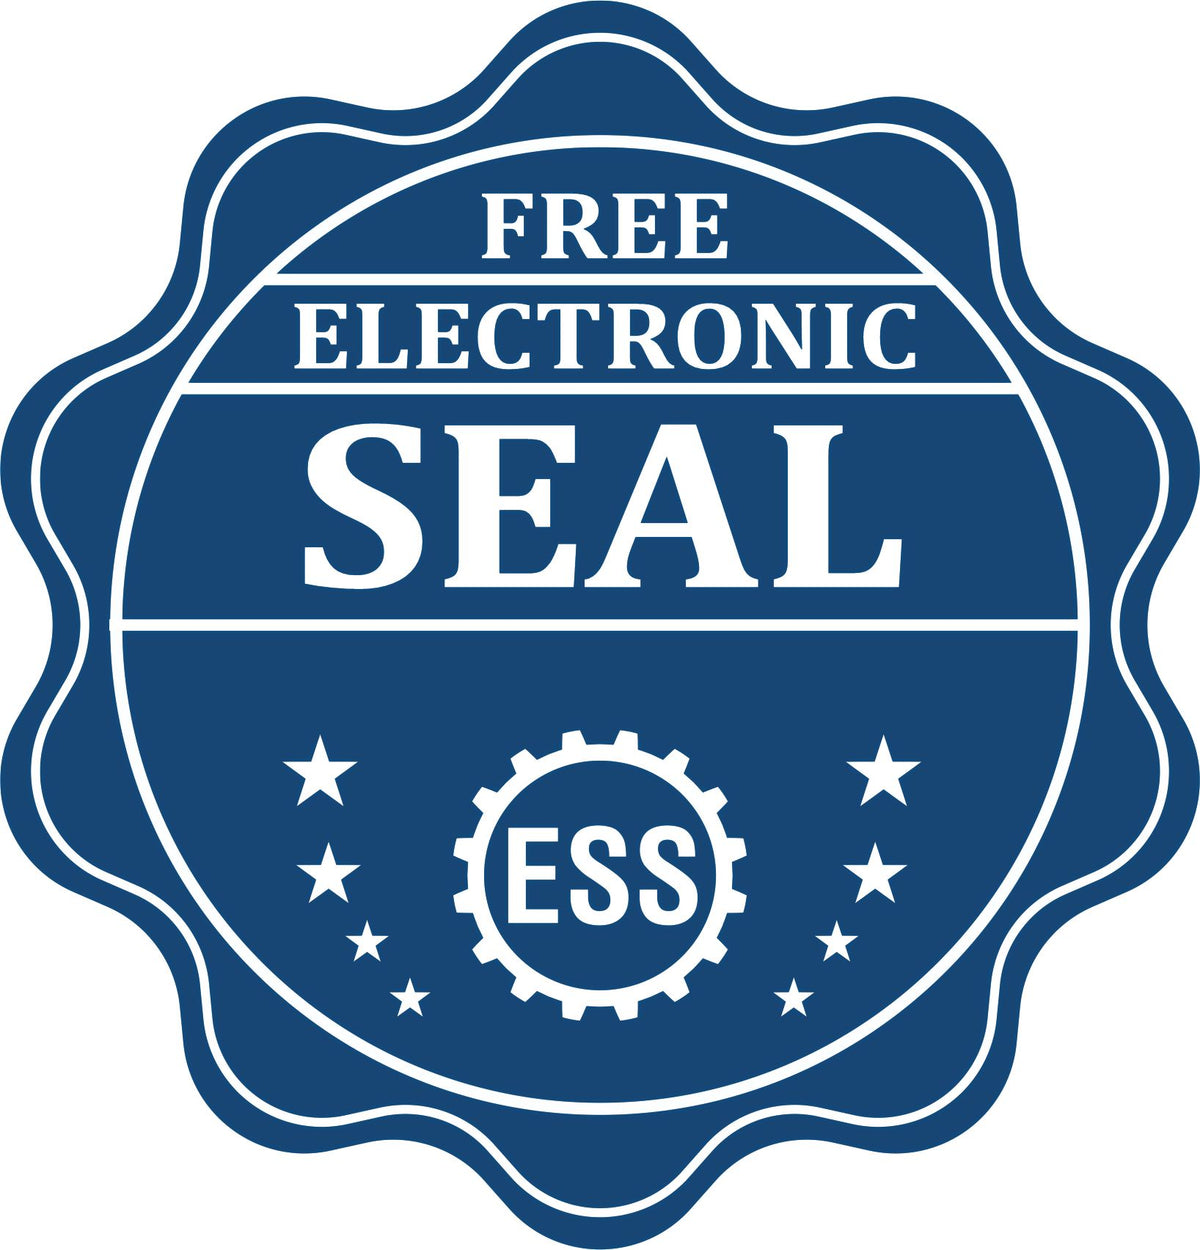 A badge showing a free electronic seal for the Slim Pre-Inked New York Land Surveyor Seal Stamp with stars and the ESS gear on the emblem.